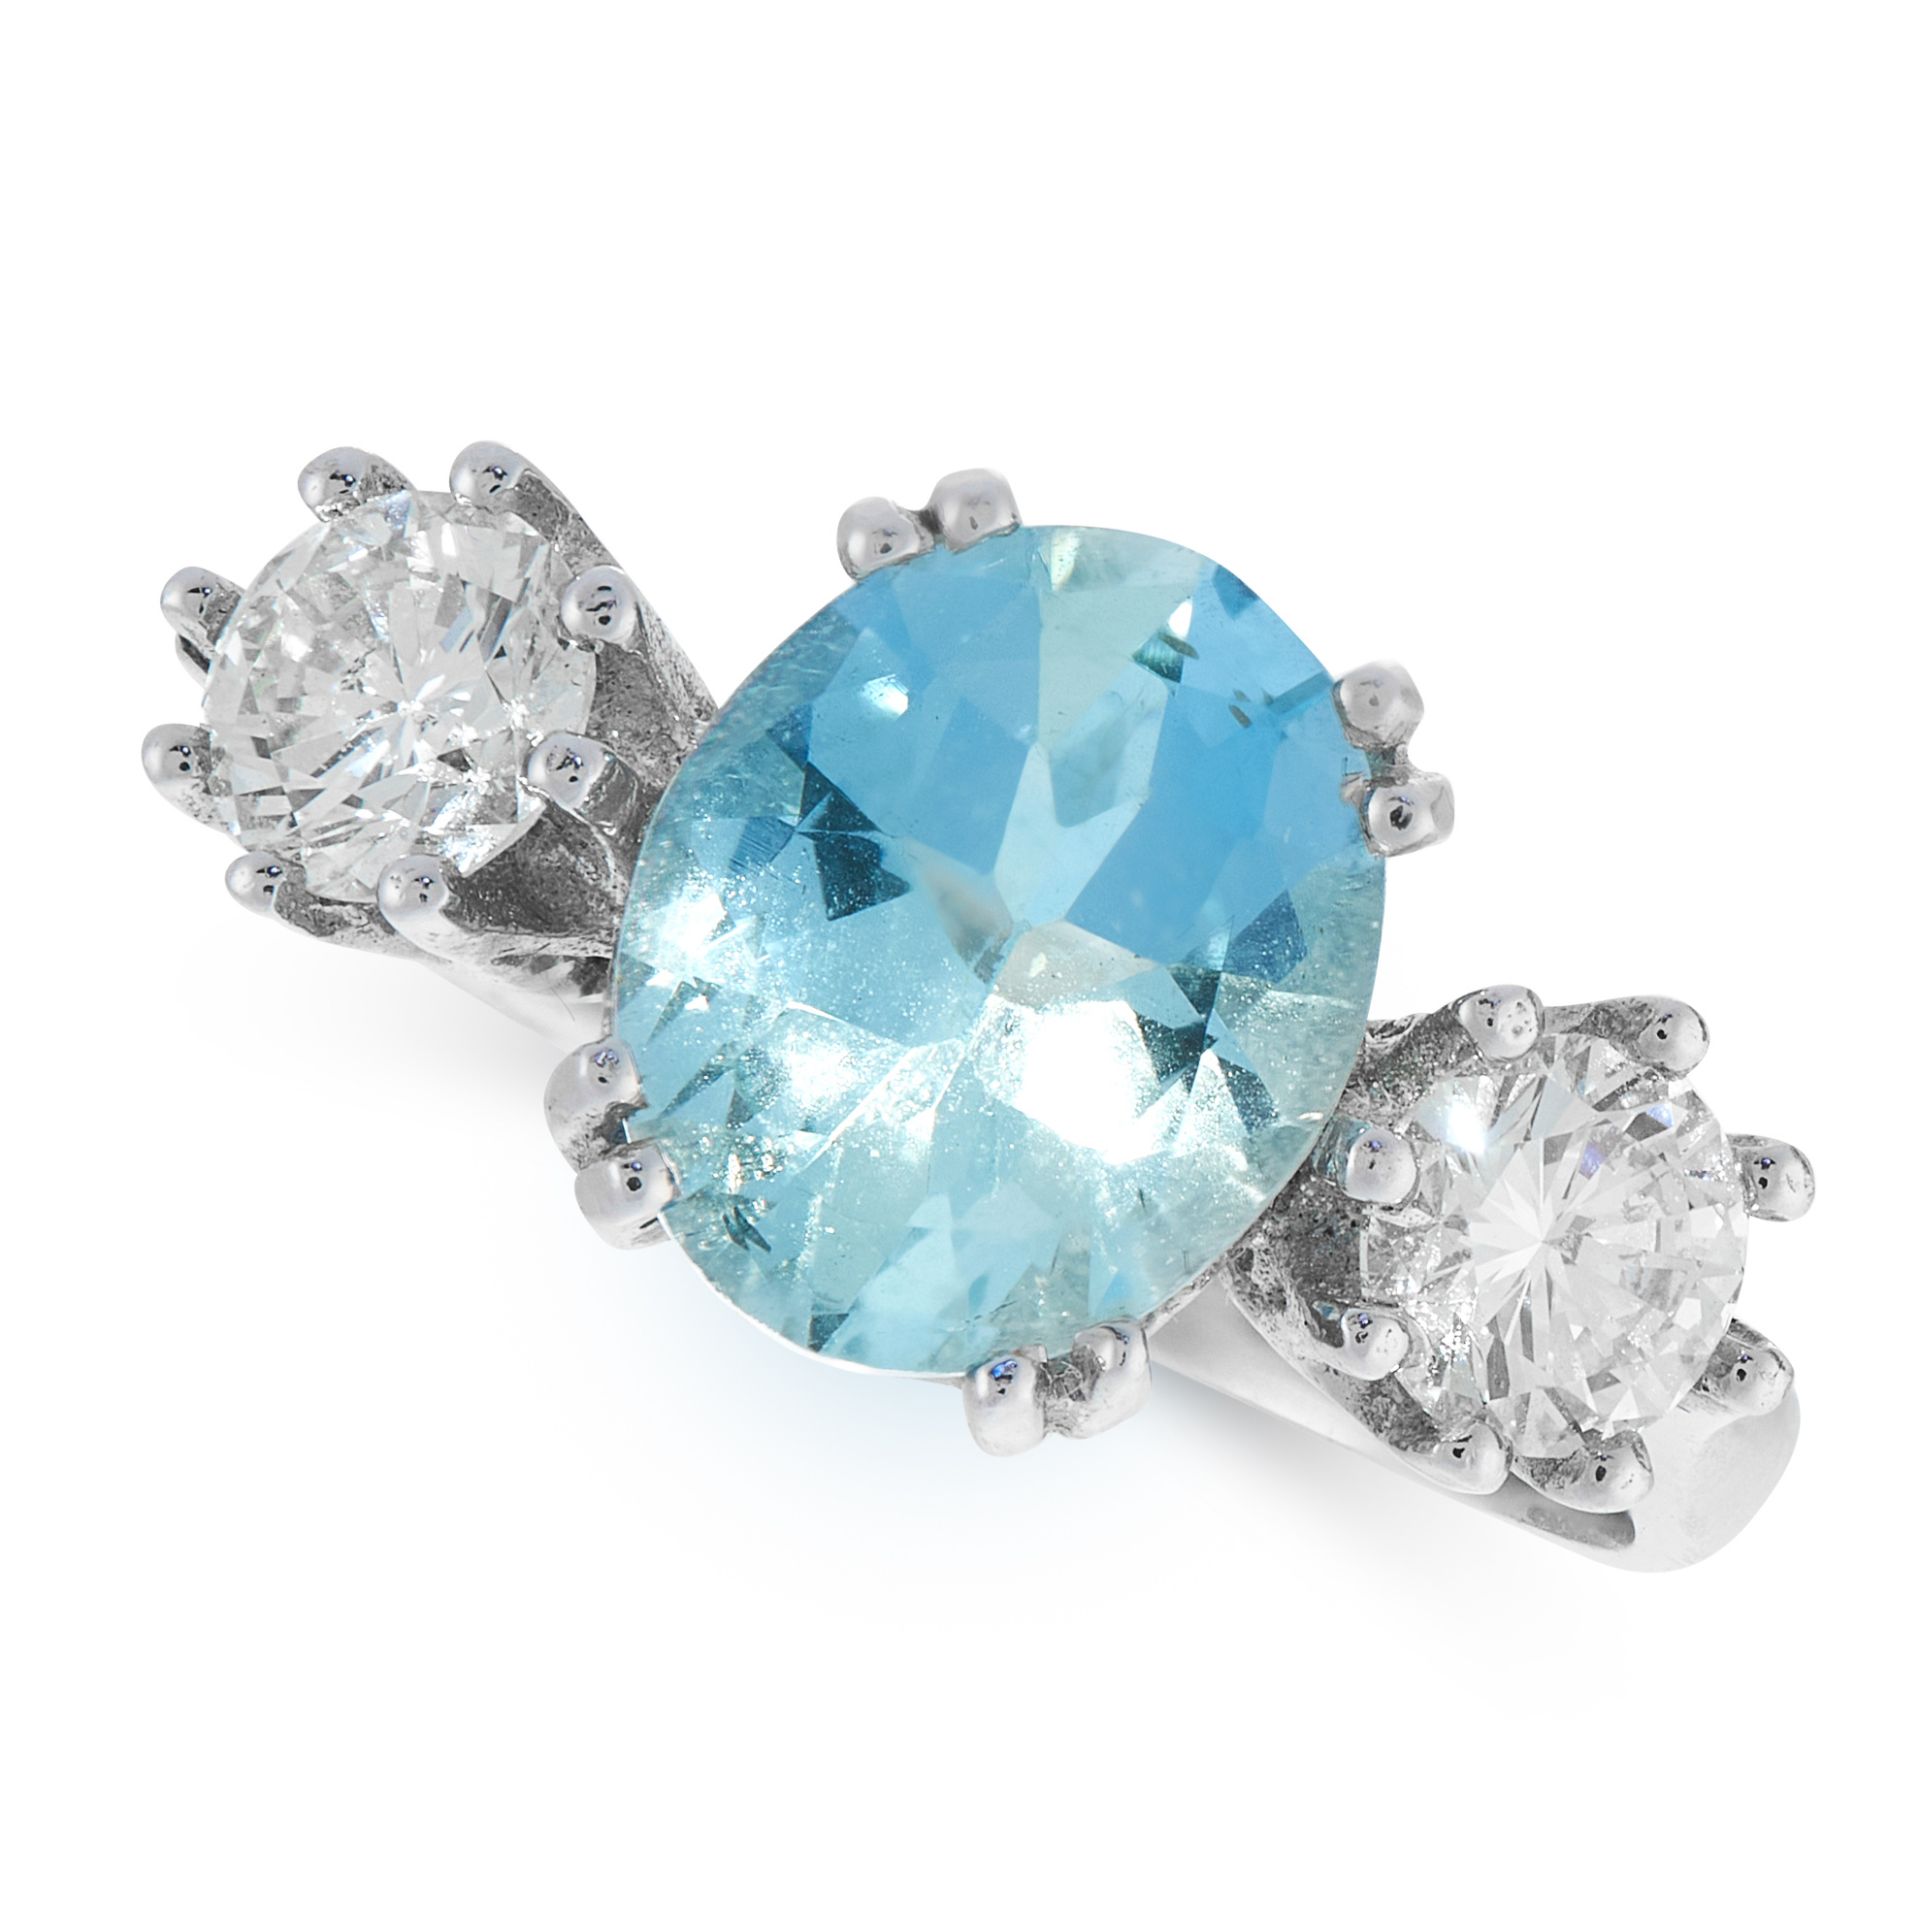 AN AQUAMARINE AND DIAMOND DRESS RING in 18ct white gold, set with an oval cut aquamarine of 2.02